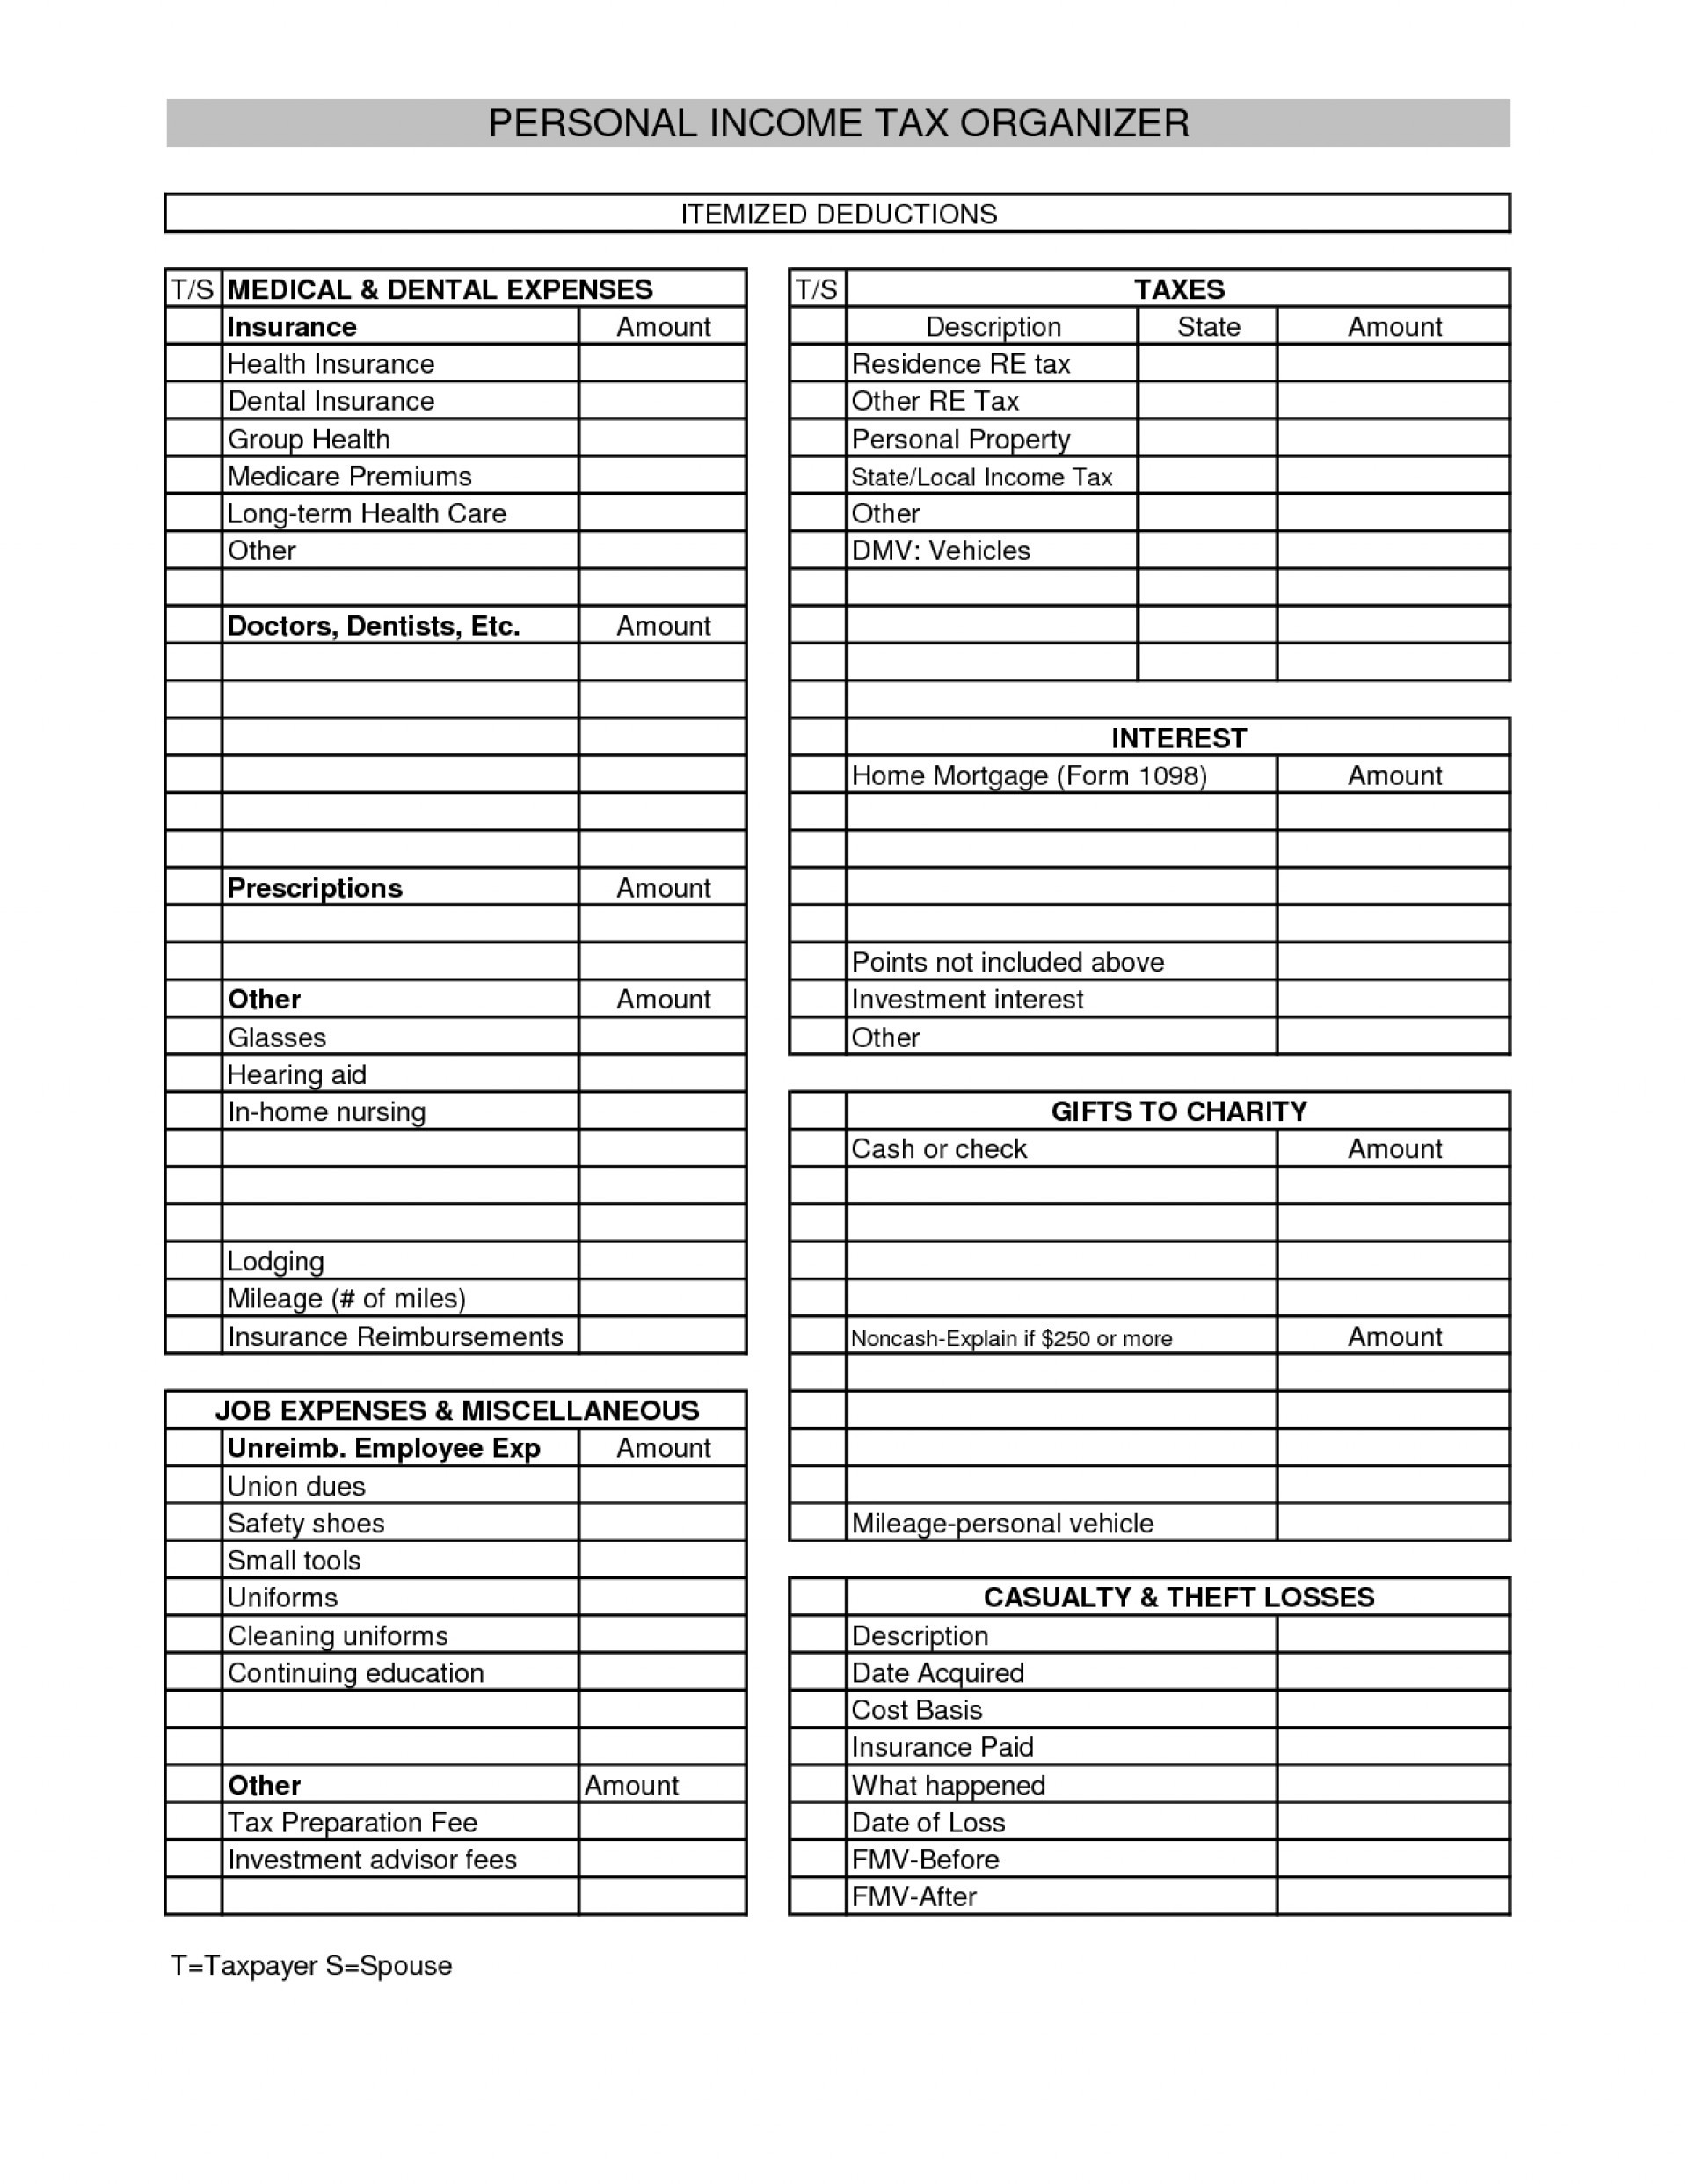 irs-itemized-deductions-worksheet-db-excel